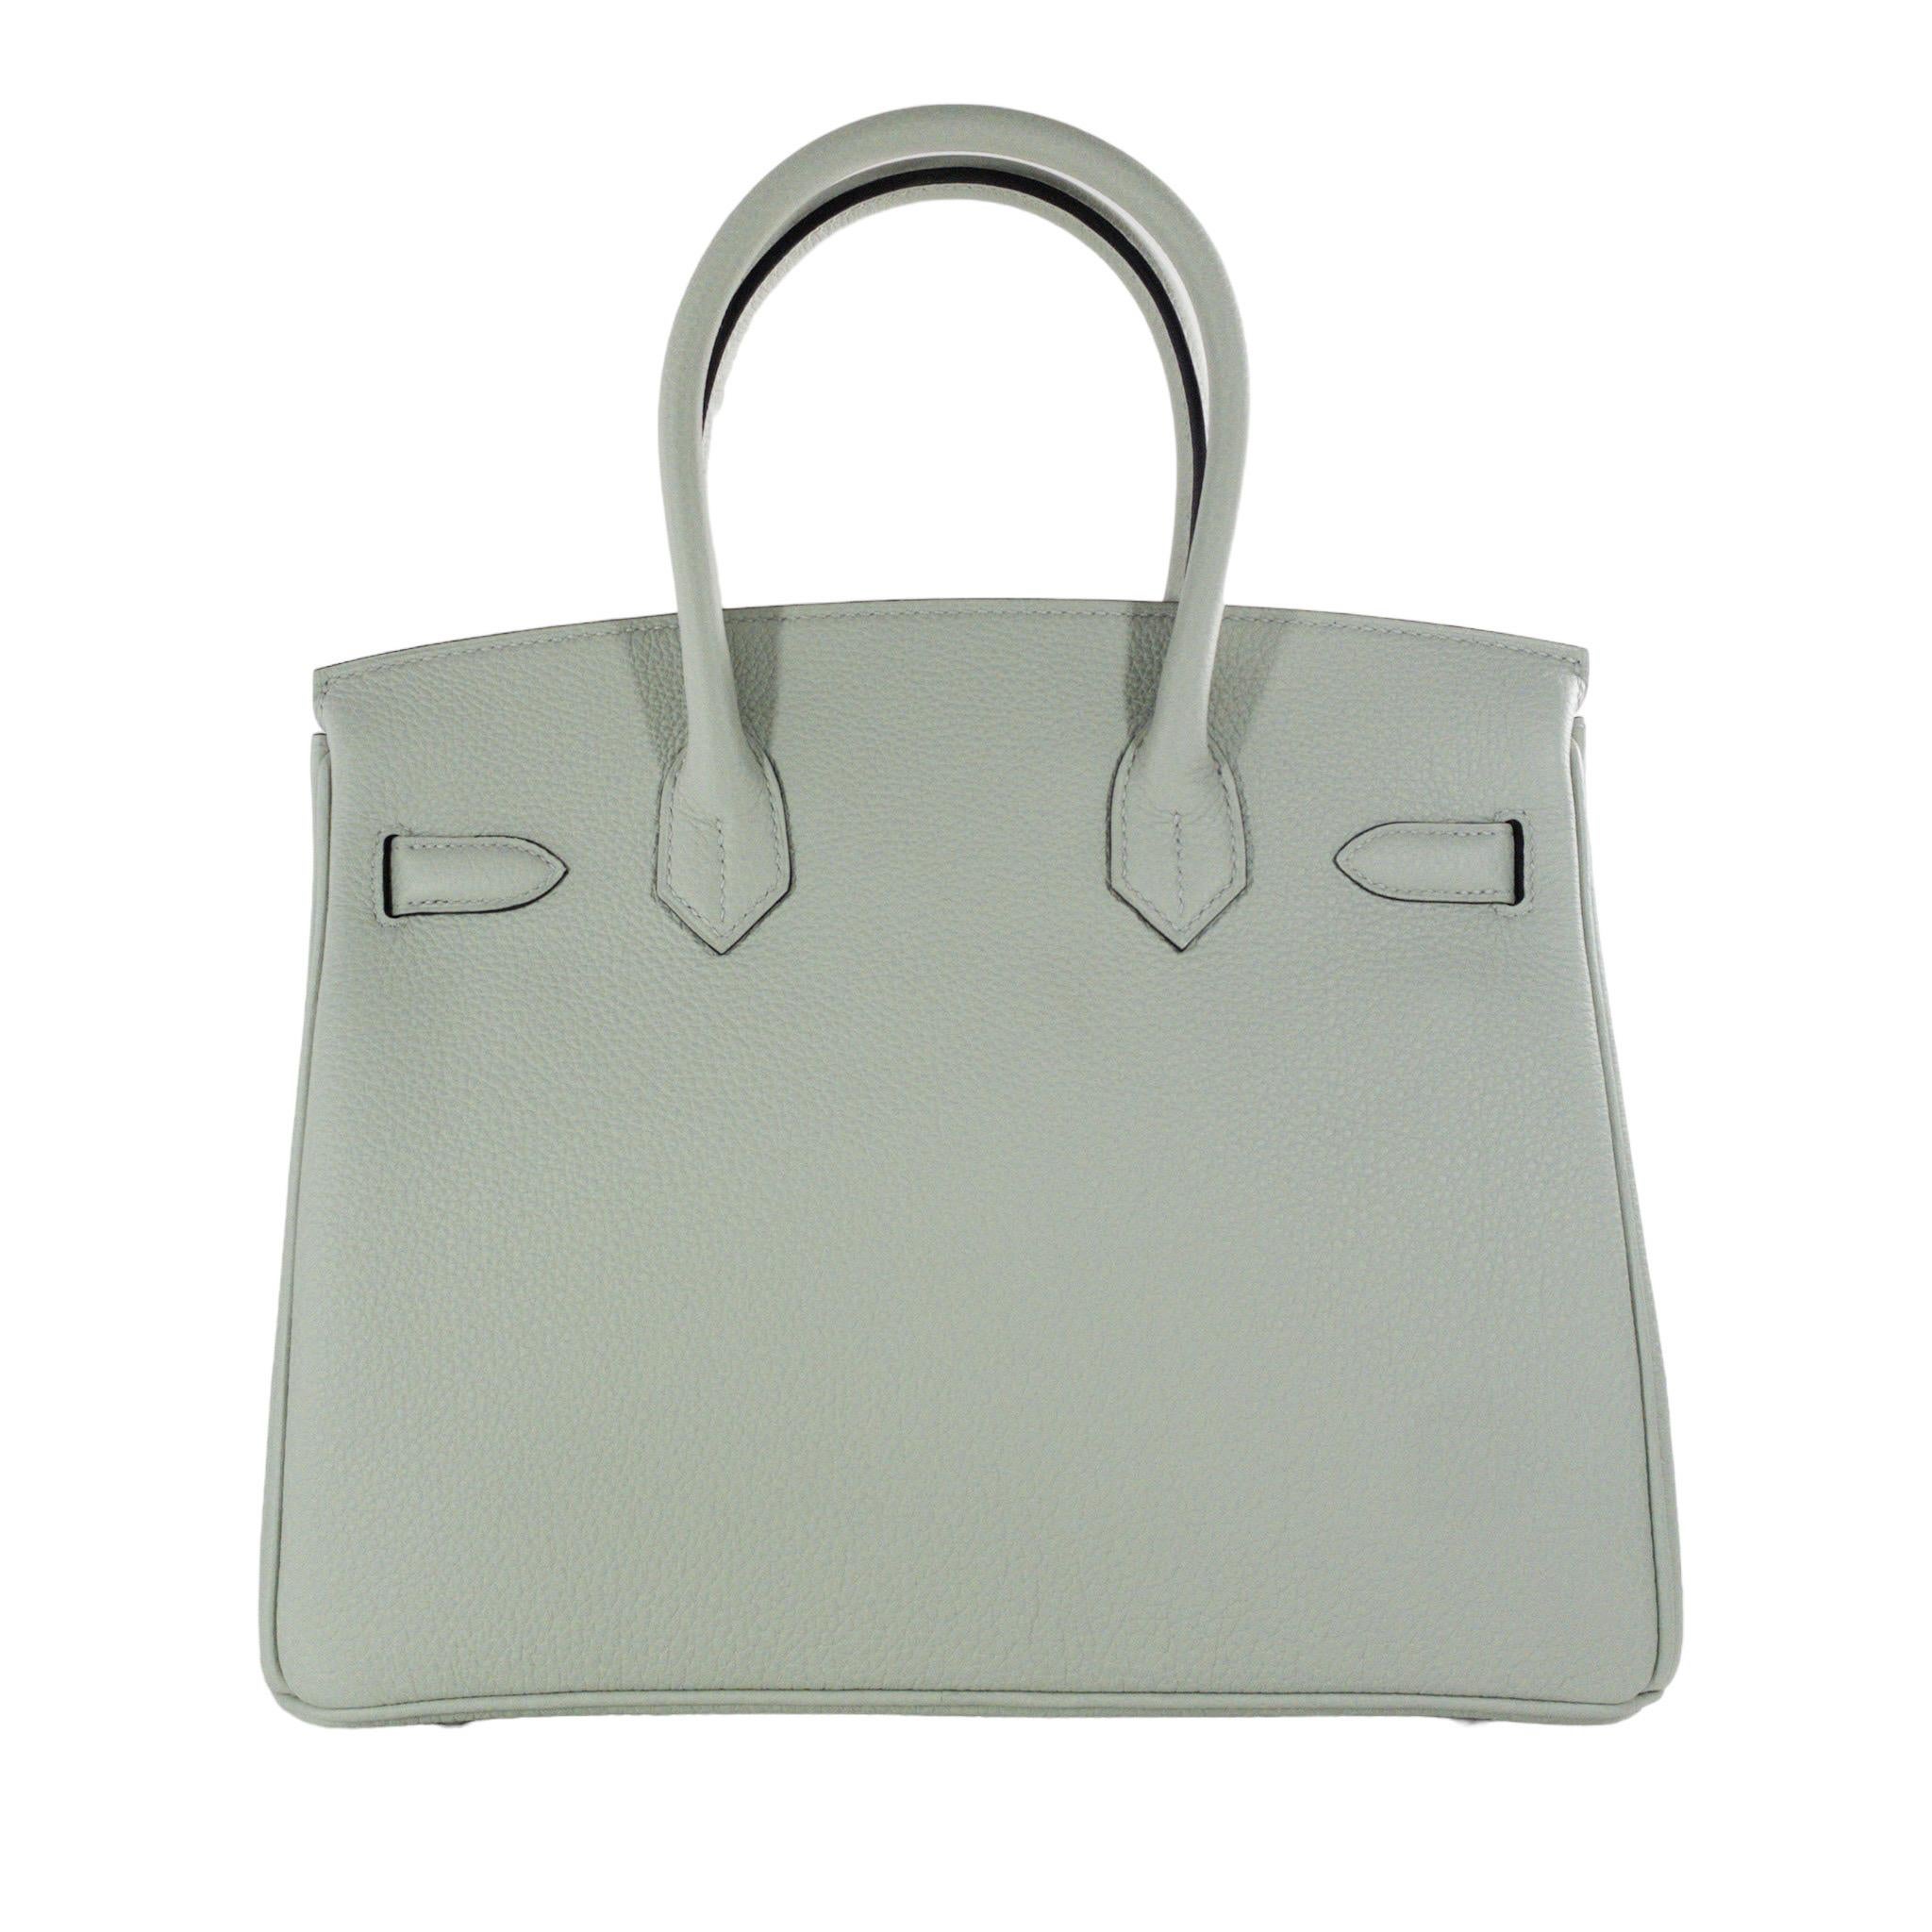 Consign of the Times presents this brand new in box Hermes Birkin 30 in Gris Neve Togo leather with Palladium hardware. This is a new stunning color by Hermes for the 2023 spring summer season.  All hardware is sealed.  This bag features double